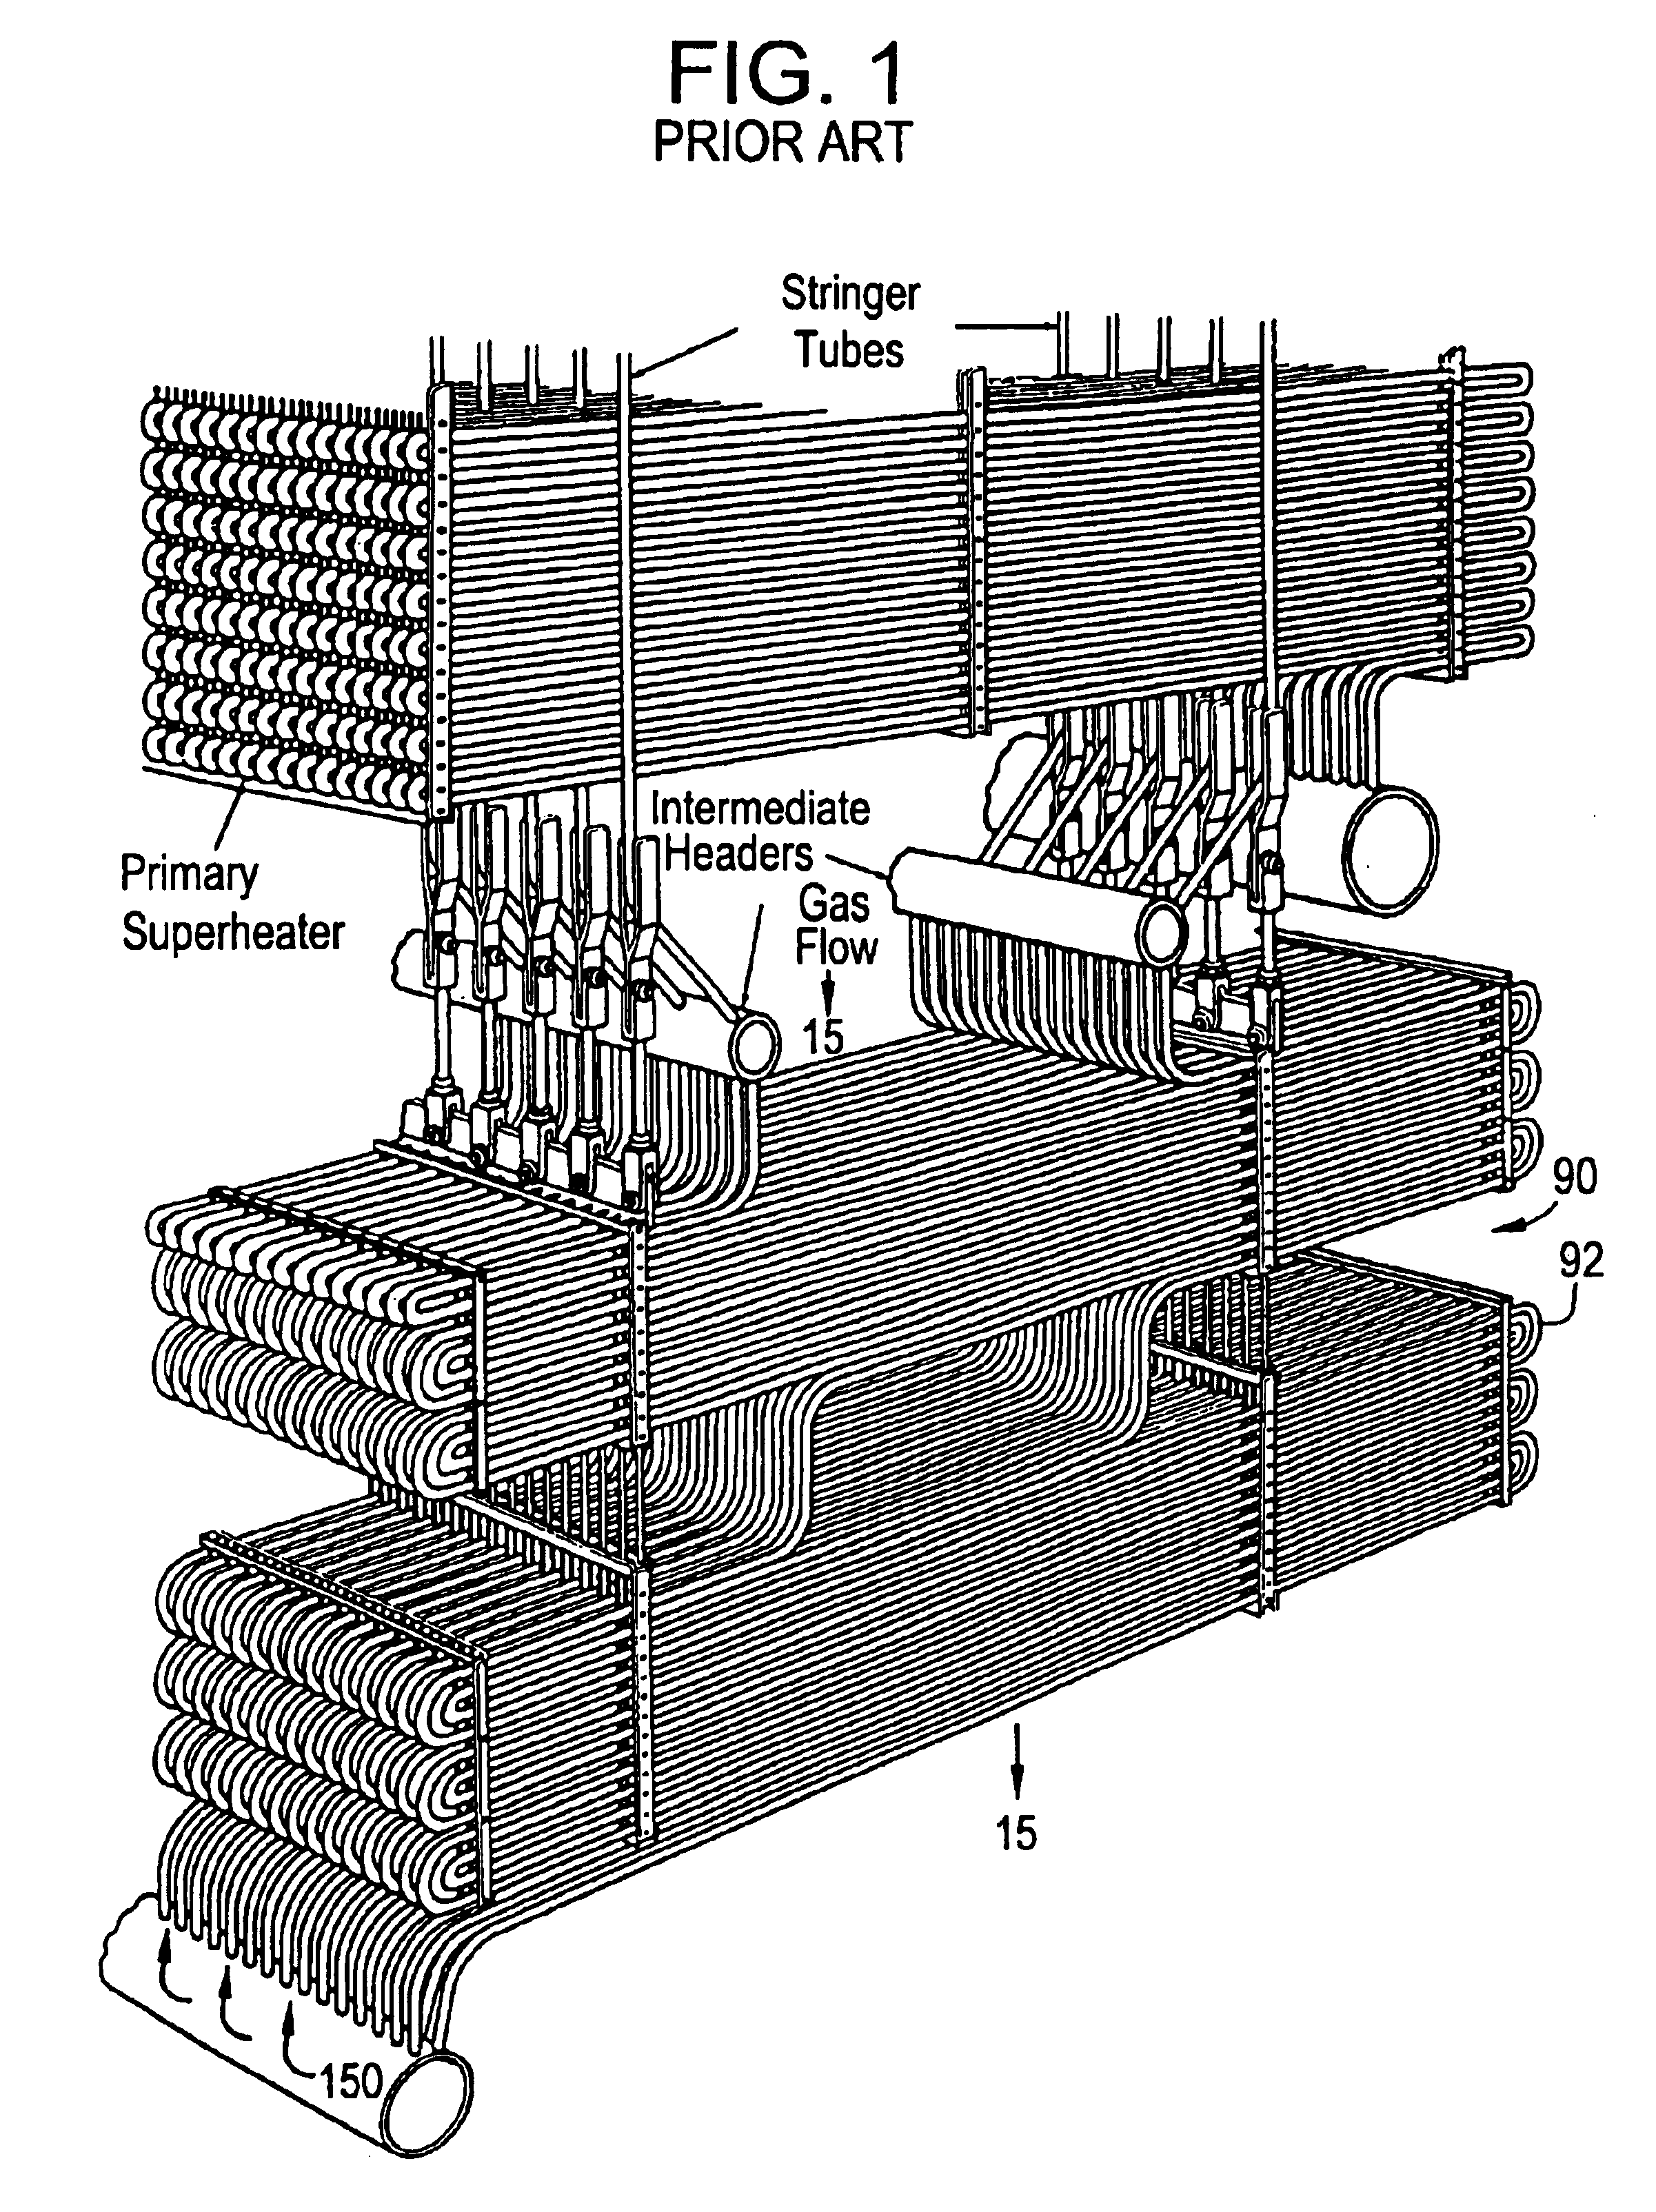 Passive system for optimal NOx reduction via selective catalytic reduction with variable boiler load